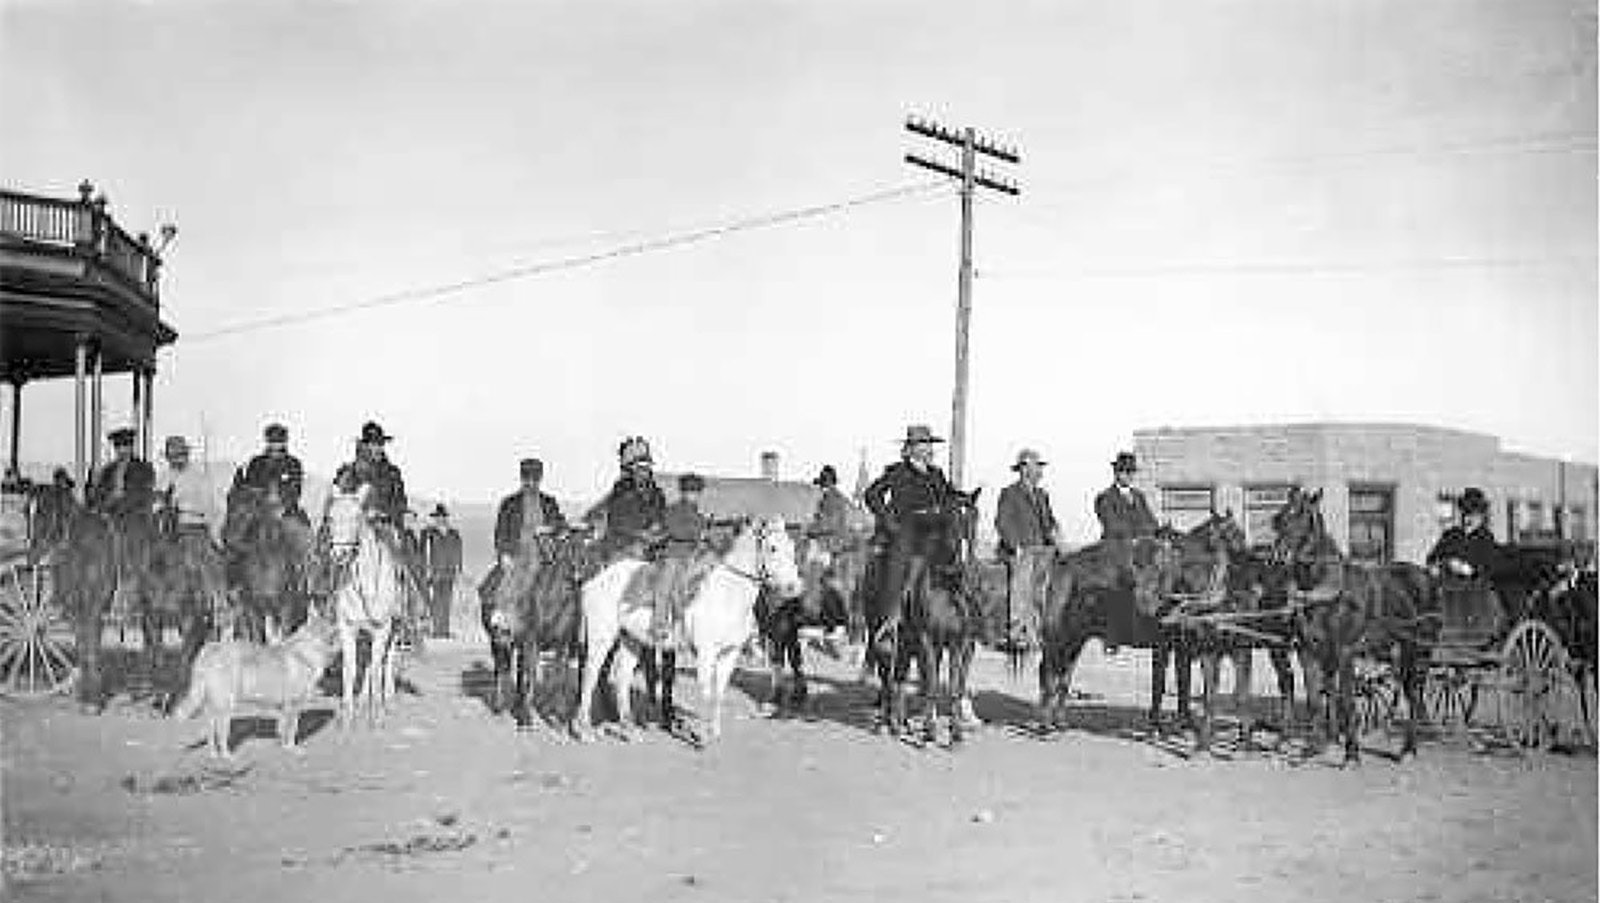 Buffalo Bill Cody with his hunting guests — what he also called his "posse" — in front of the Irma Hotel in 1904 with the First National Bank in the background.